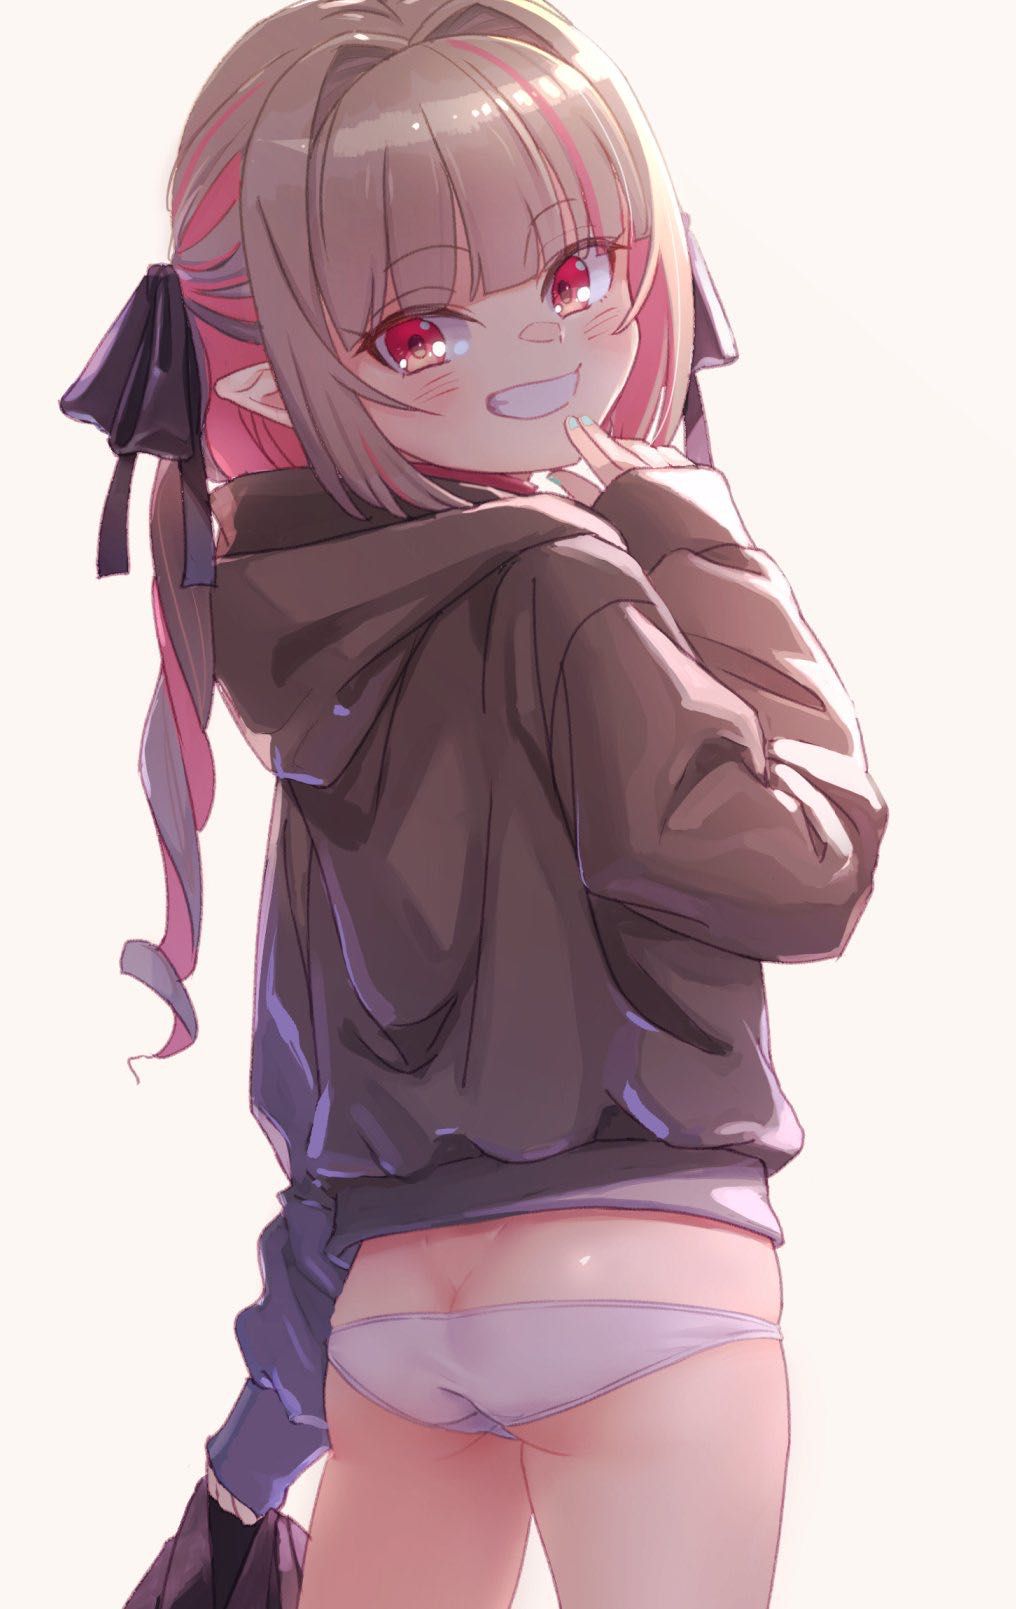 【Lori pants viewing】 100 consecutive shots of secondary loli pants secondary erotic images that are safe and secure enough to fulfill the desire to see the pants of the secondary loli girl 28